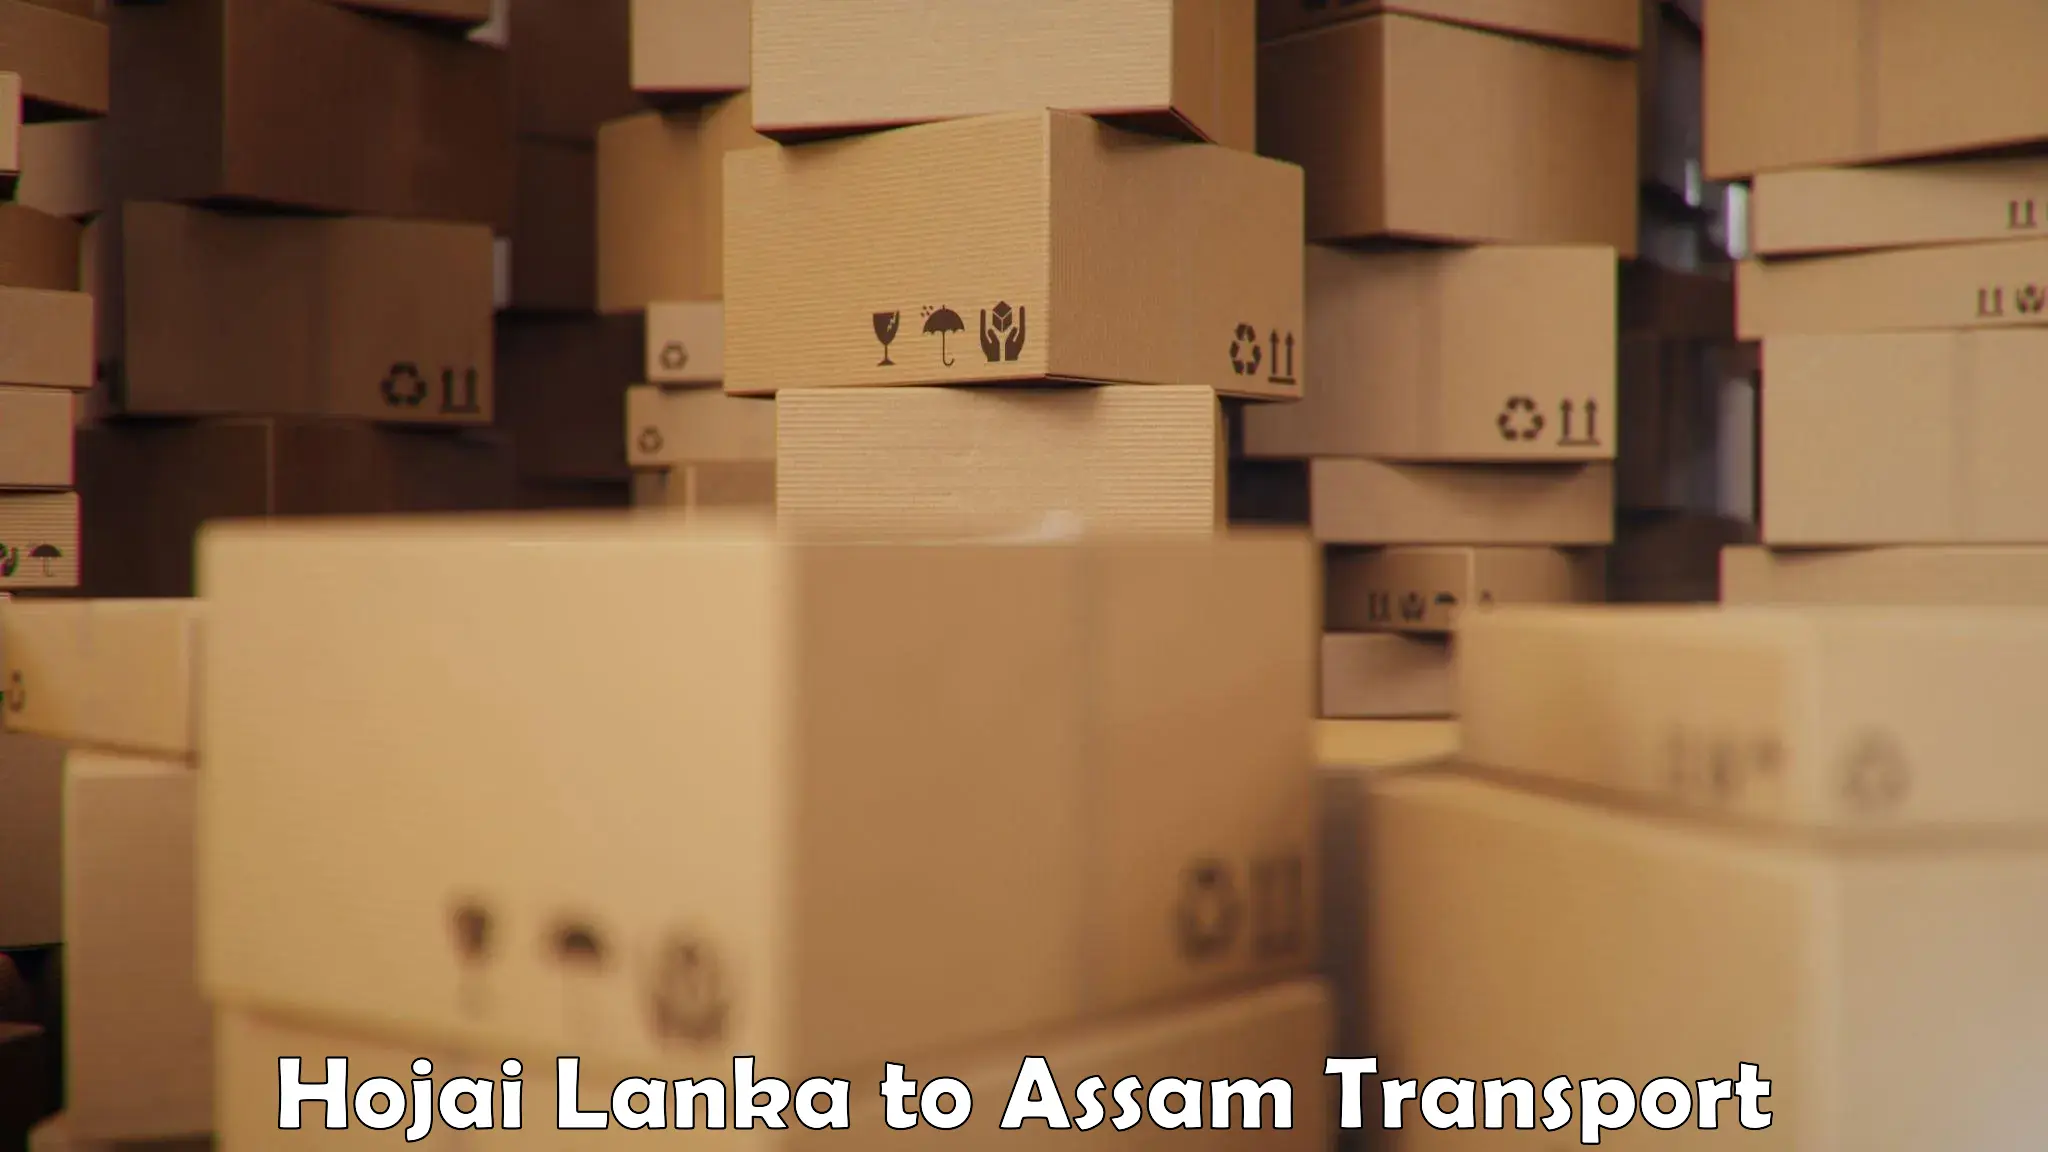 Goods delivery service Hojai Lanka to Assam